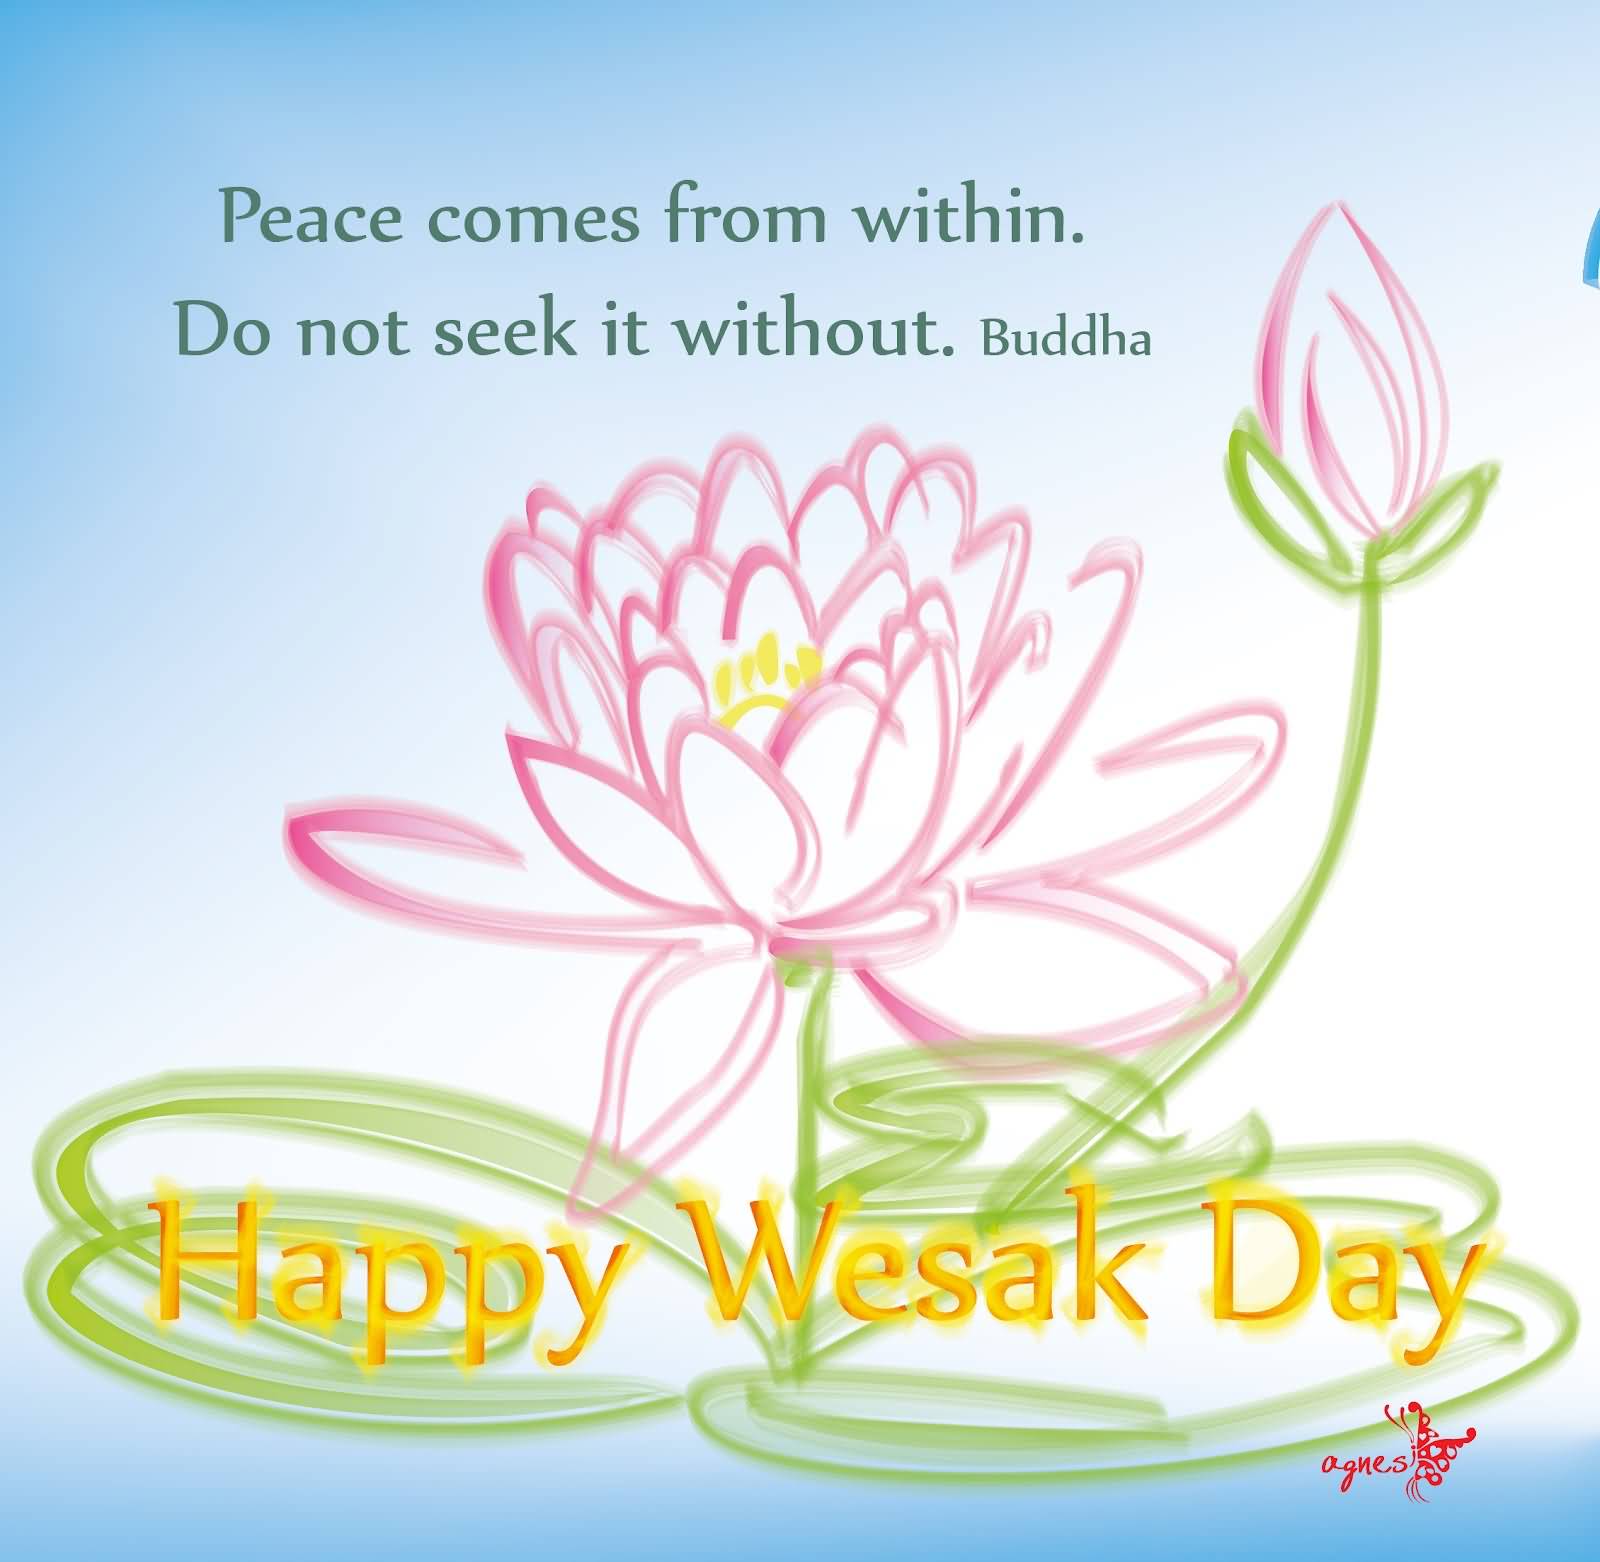 Peace Comes From Within. Do Not Seek It Without. Happy Vesak Day